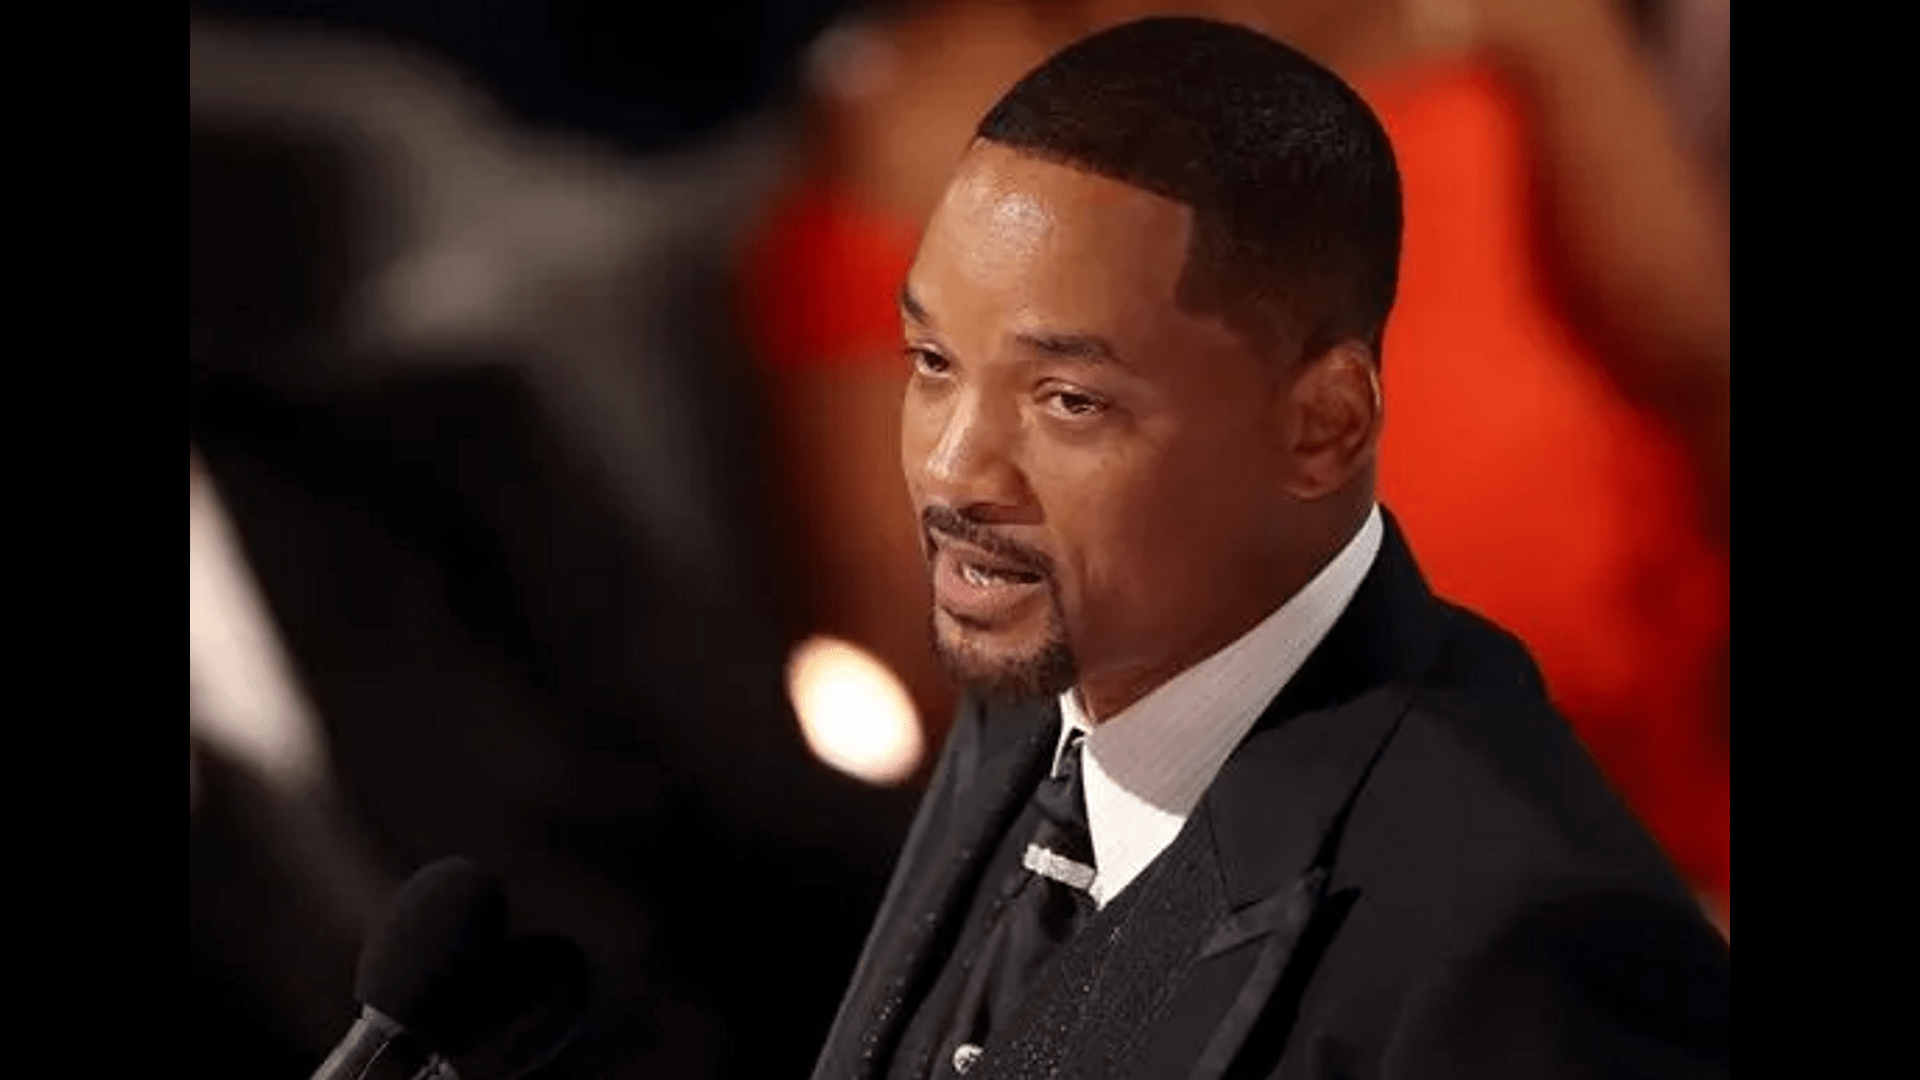 ”will-smith-keeps-his-oscar-but-the-academy-vetoes-it-for-ten-years”